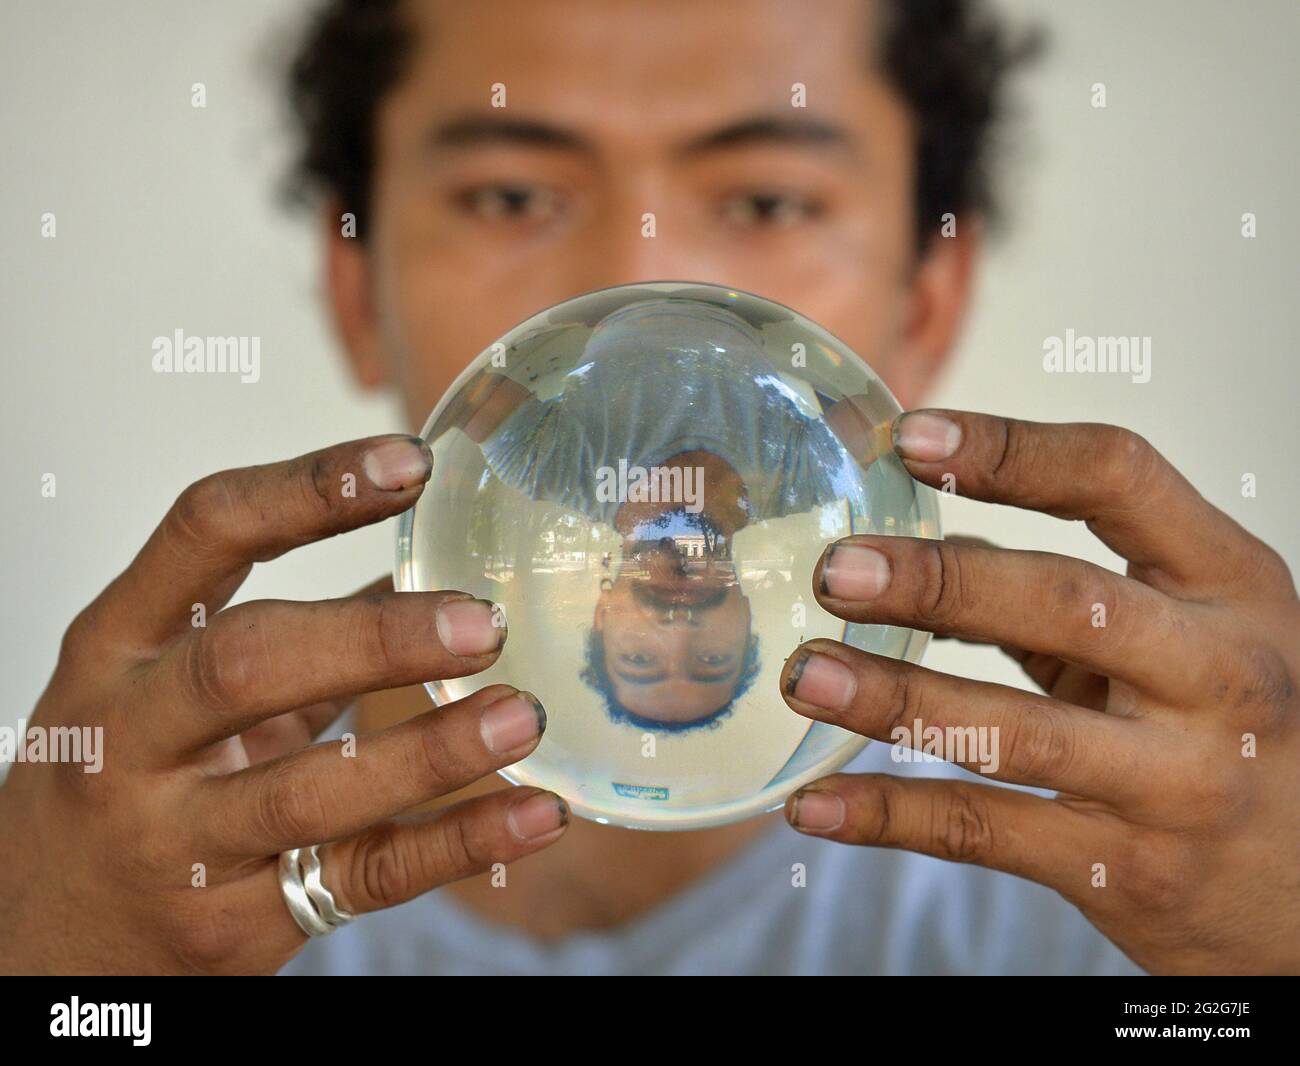 Young Latino man with dirty fingernails holds a crystal ball and stares with mesmerizing eyes at his vertically flipped mirror image on the magic orb. Stock Photo